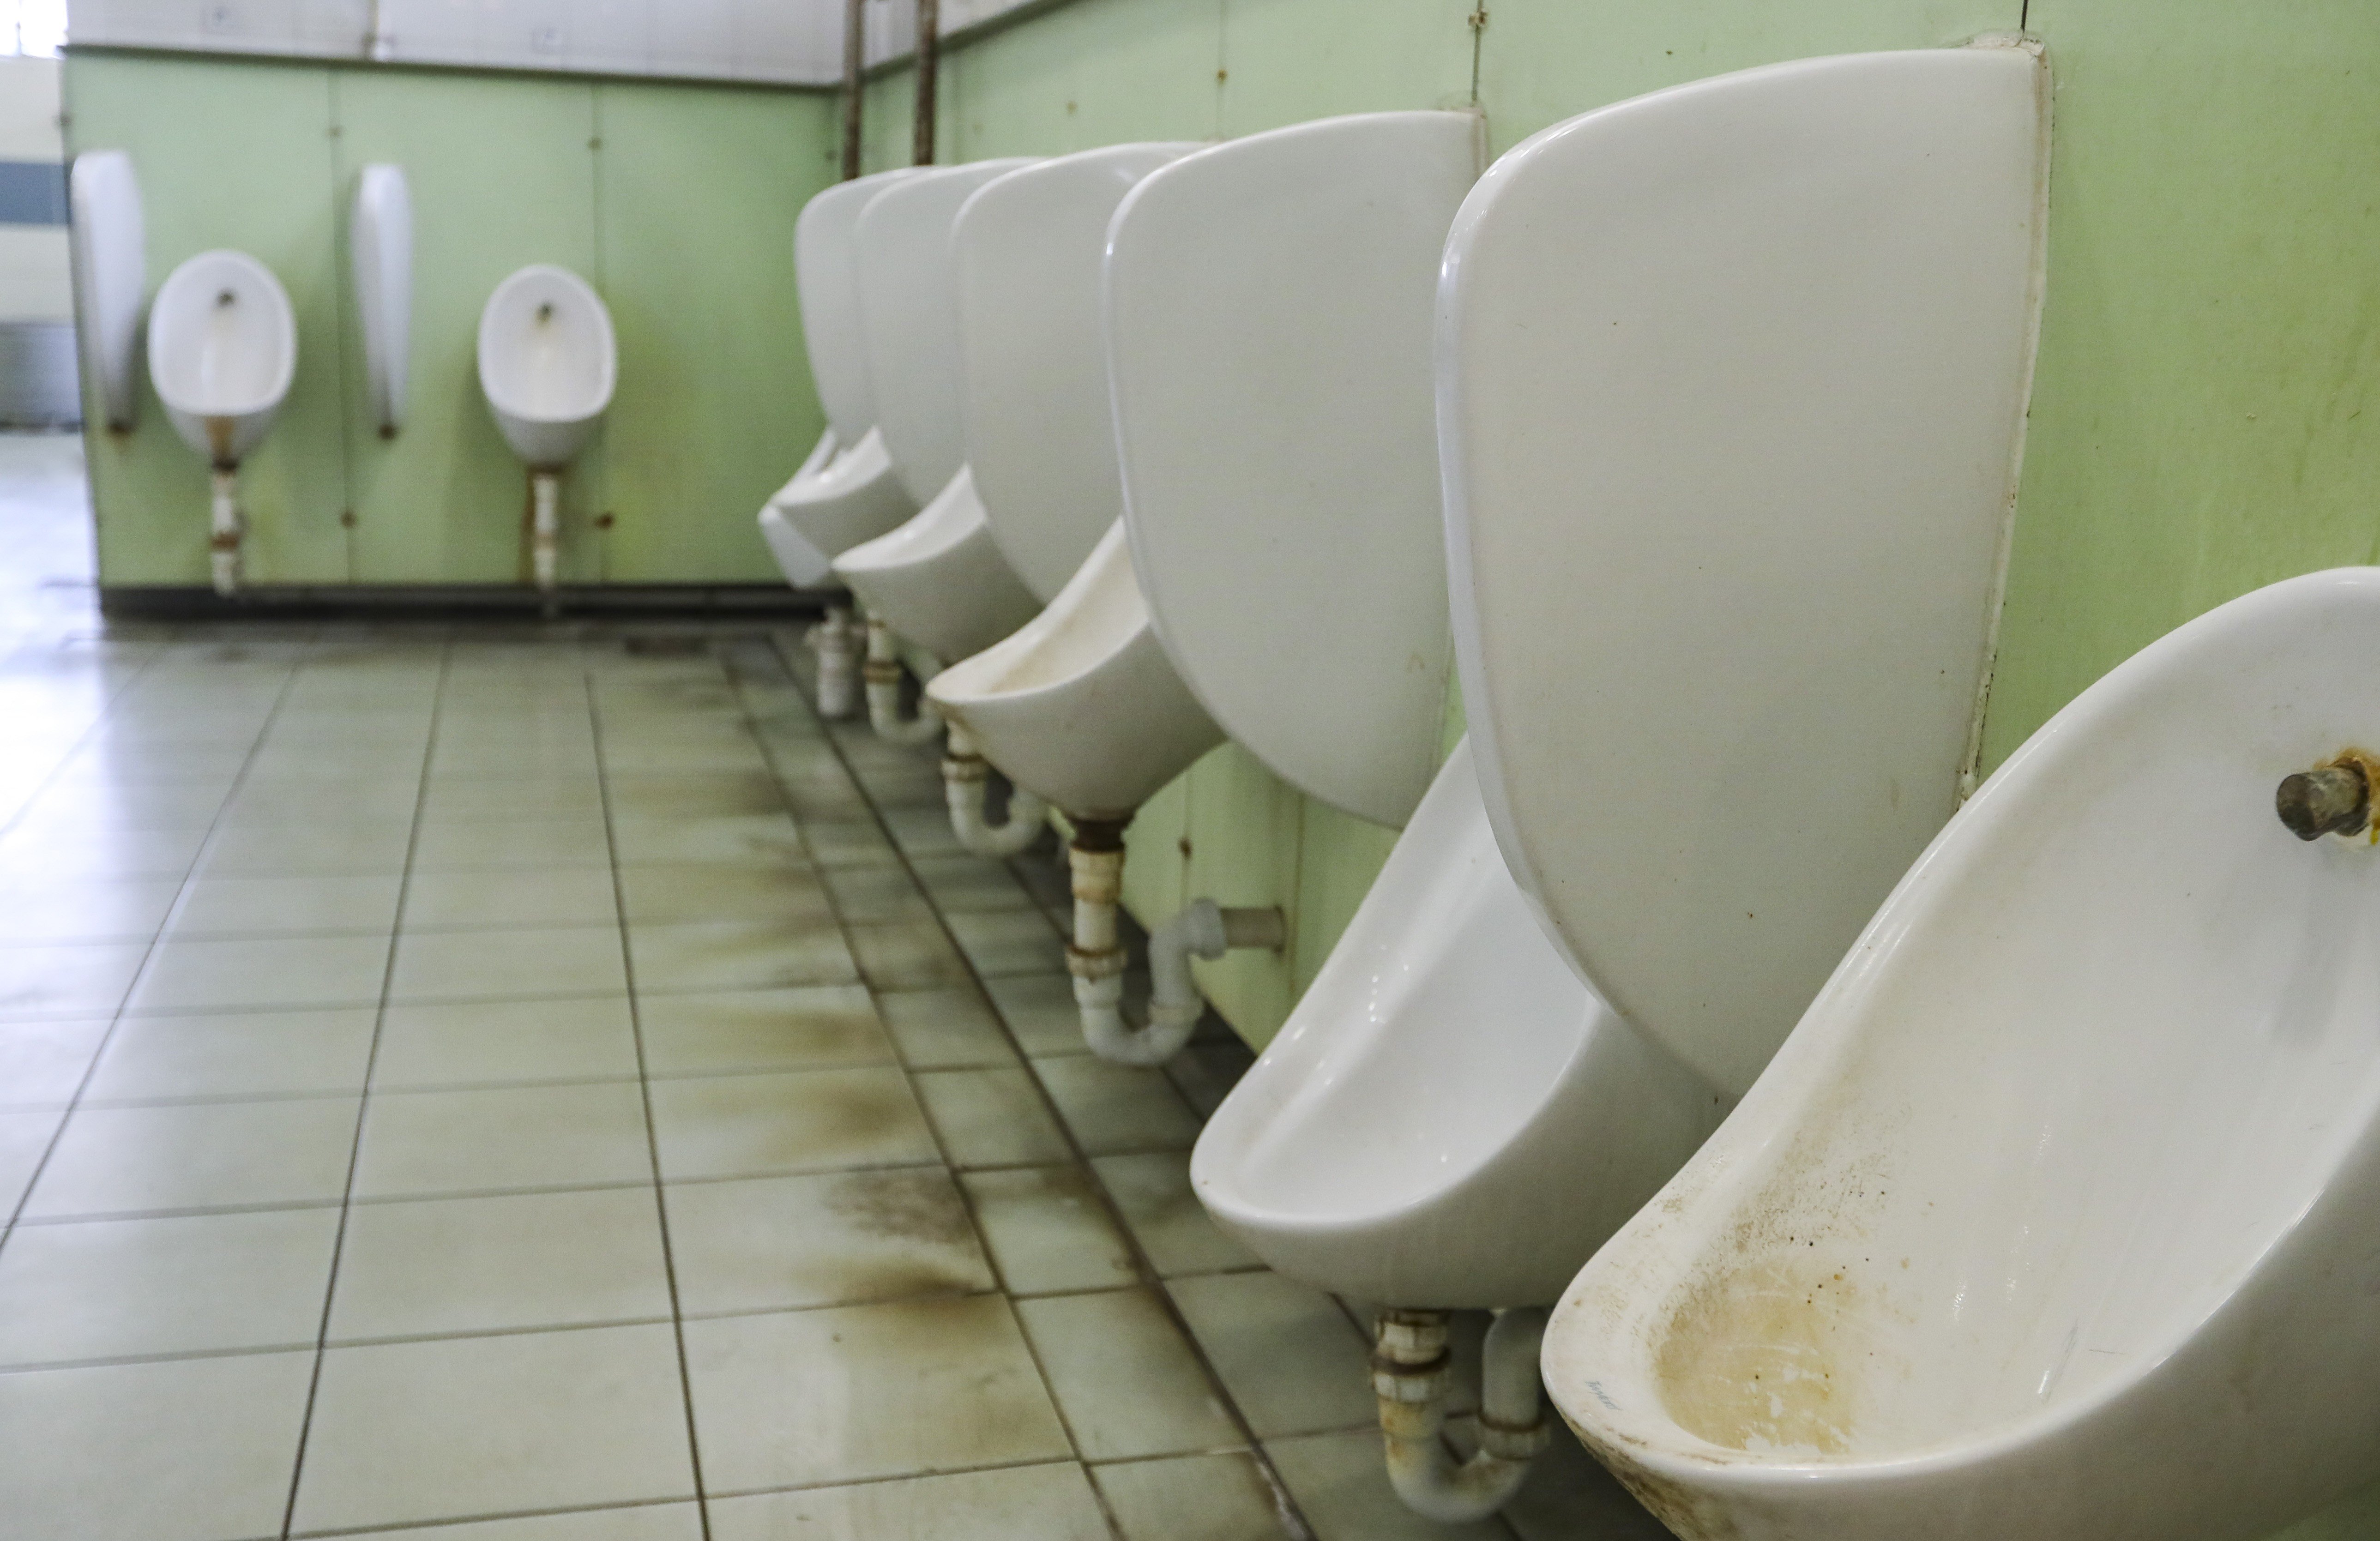 A public toilet in Kowloon City. The popular impression of government-run public toilets being stinky and clogged is justified in Hong Kong. Photo: Edmond So Image of the Tung Tsing Road Public Toilet in Kowloon City. 22FEB19 SCMP / Edmond So